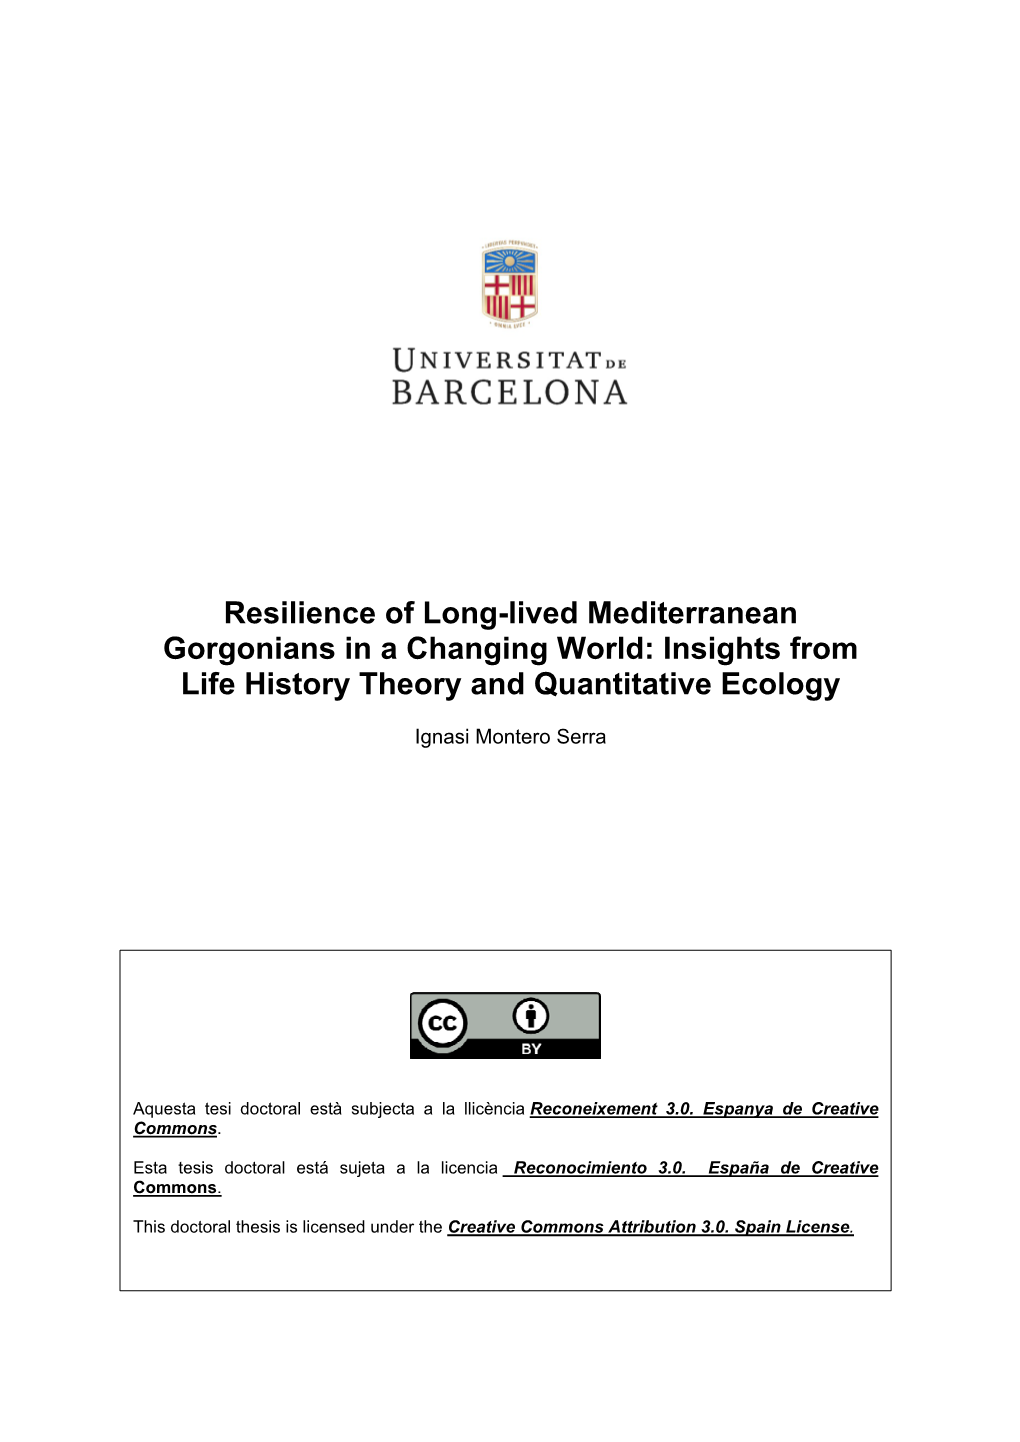 Resilience of Long-Lived Mediterranean Gorgonians in a Changing World: Insights from Life History Theory and Quantitative Ecology